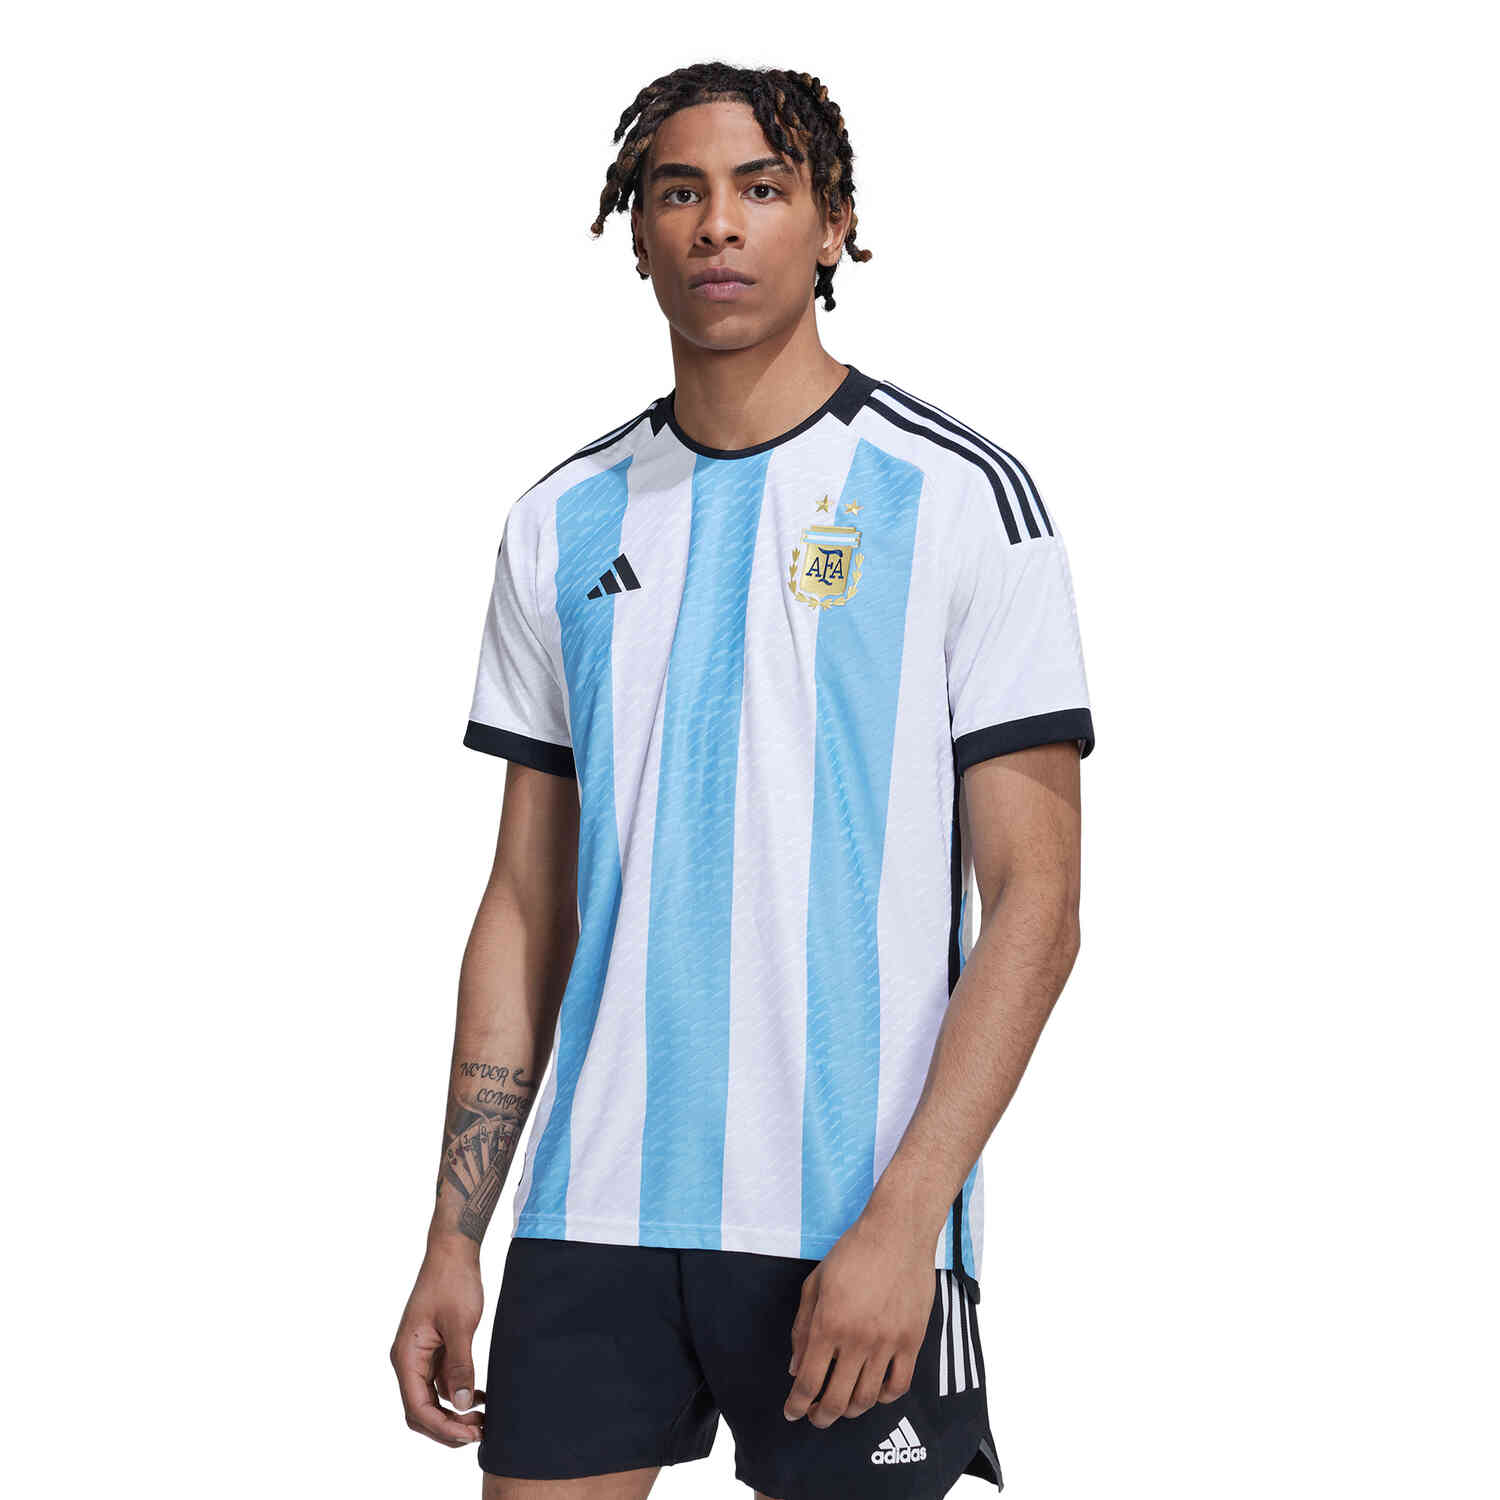 Adidas Japan Home Authentic Jersey 22 Blue / S